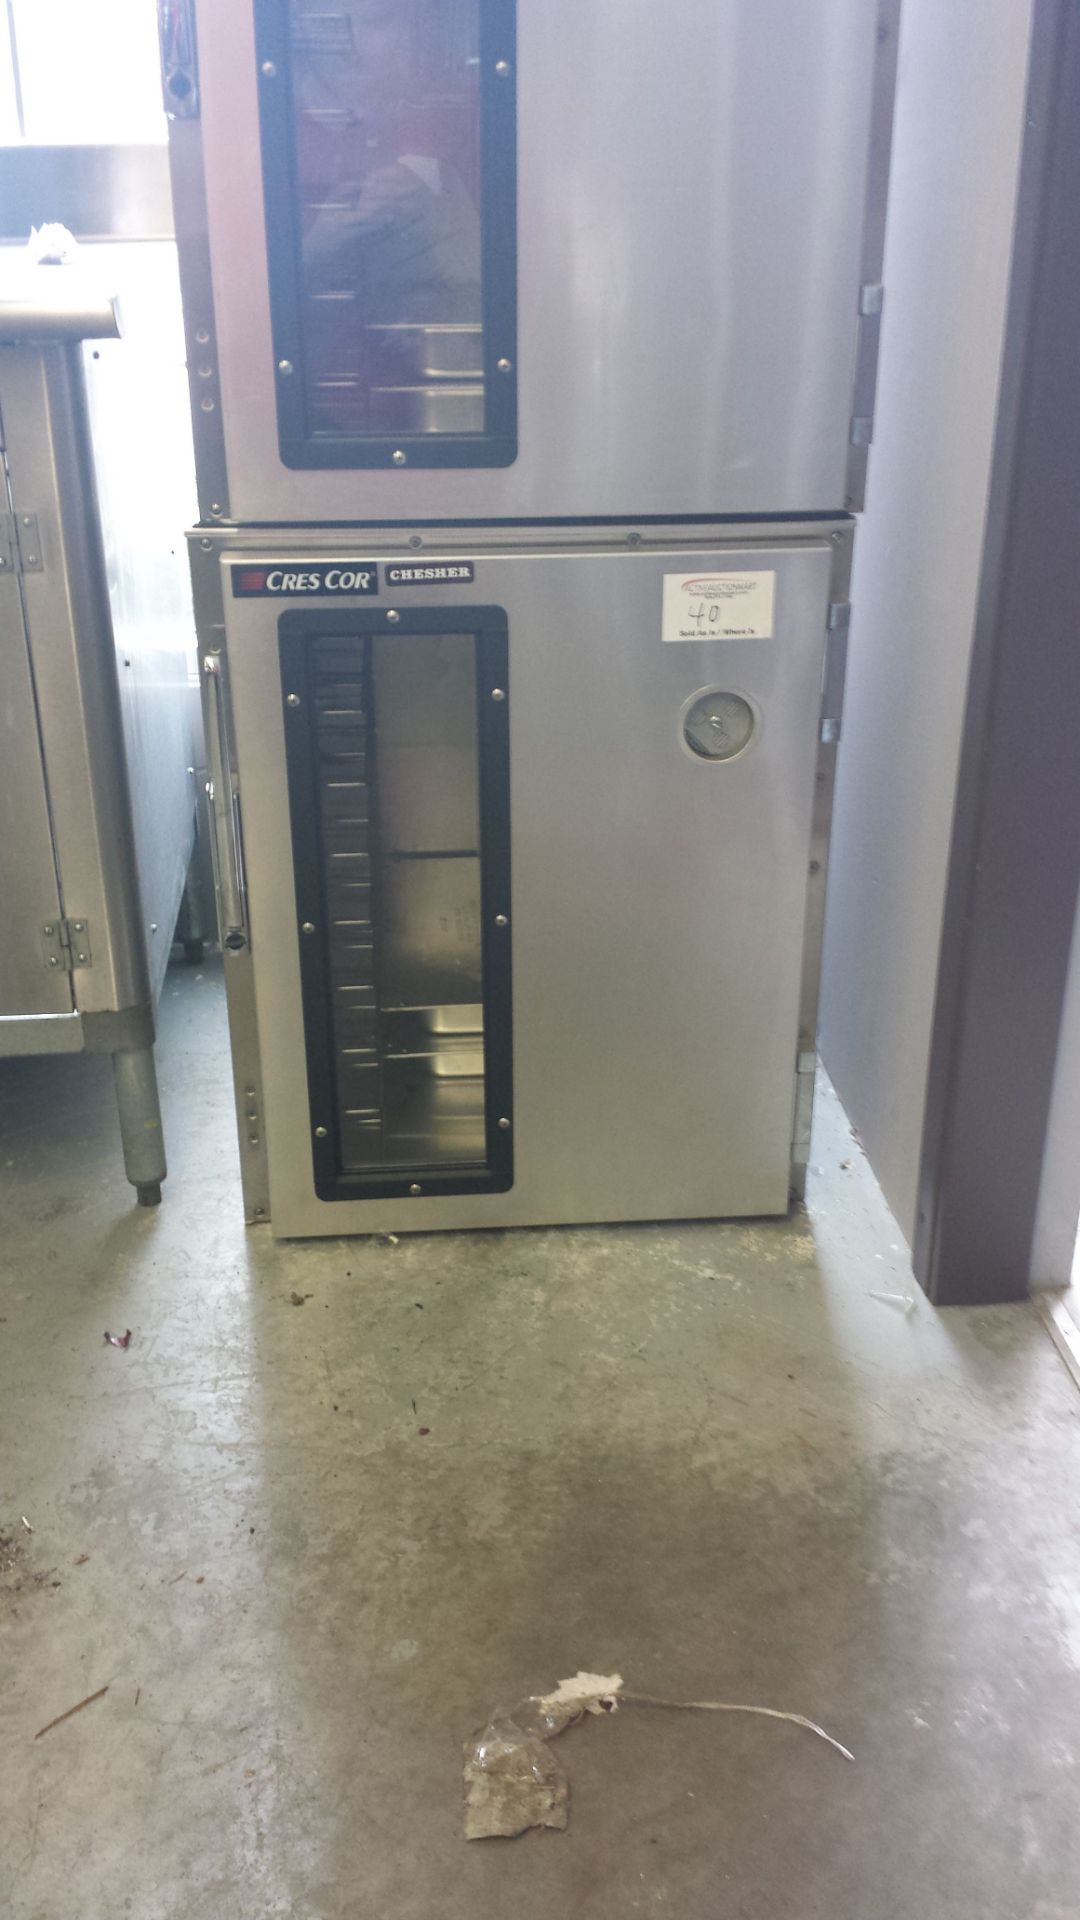 Unused Crescor - portable cold cabinet - comes with 2 cold packs